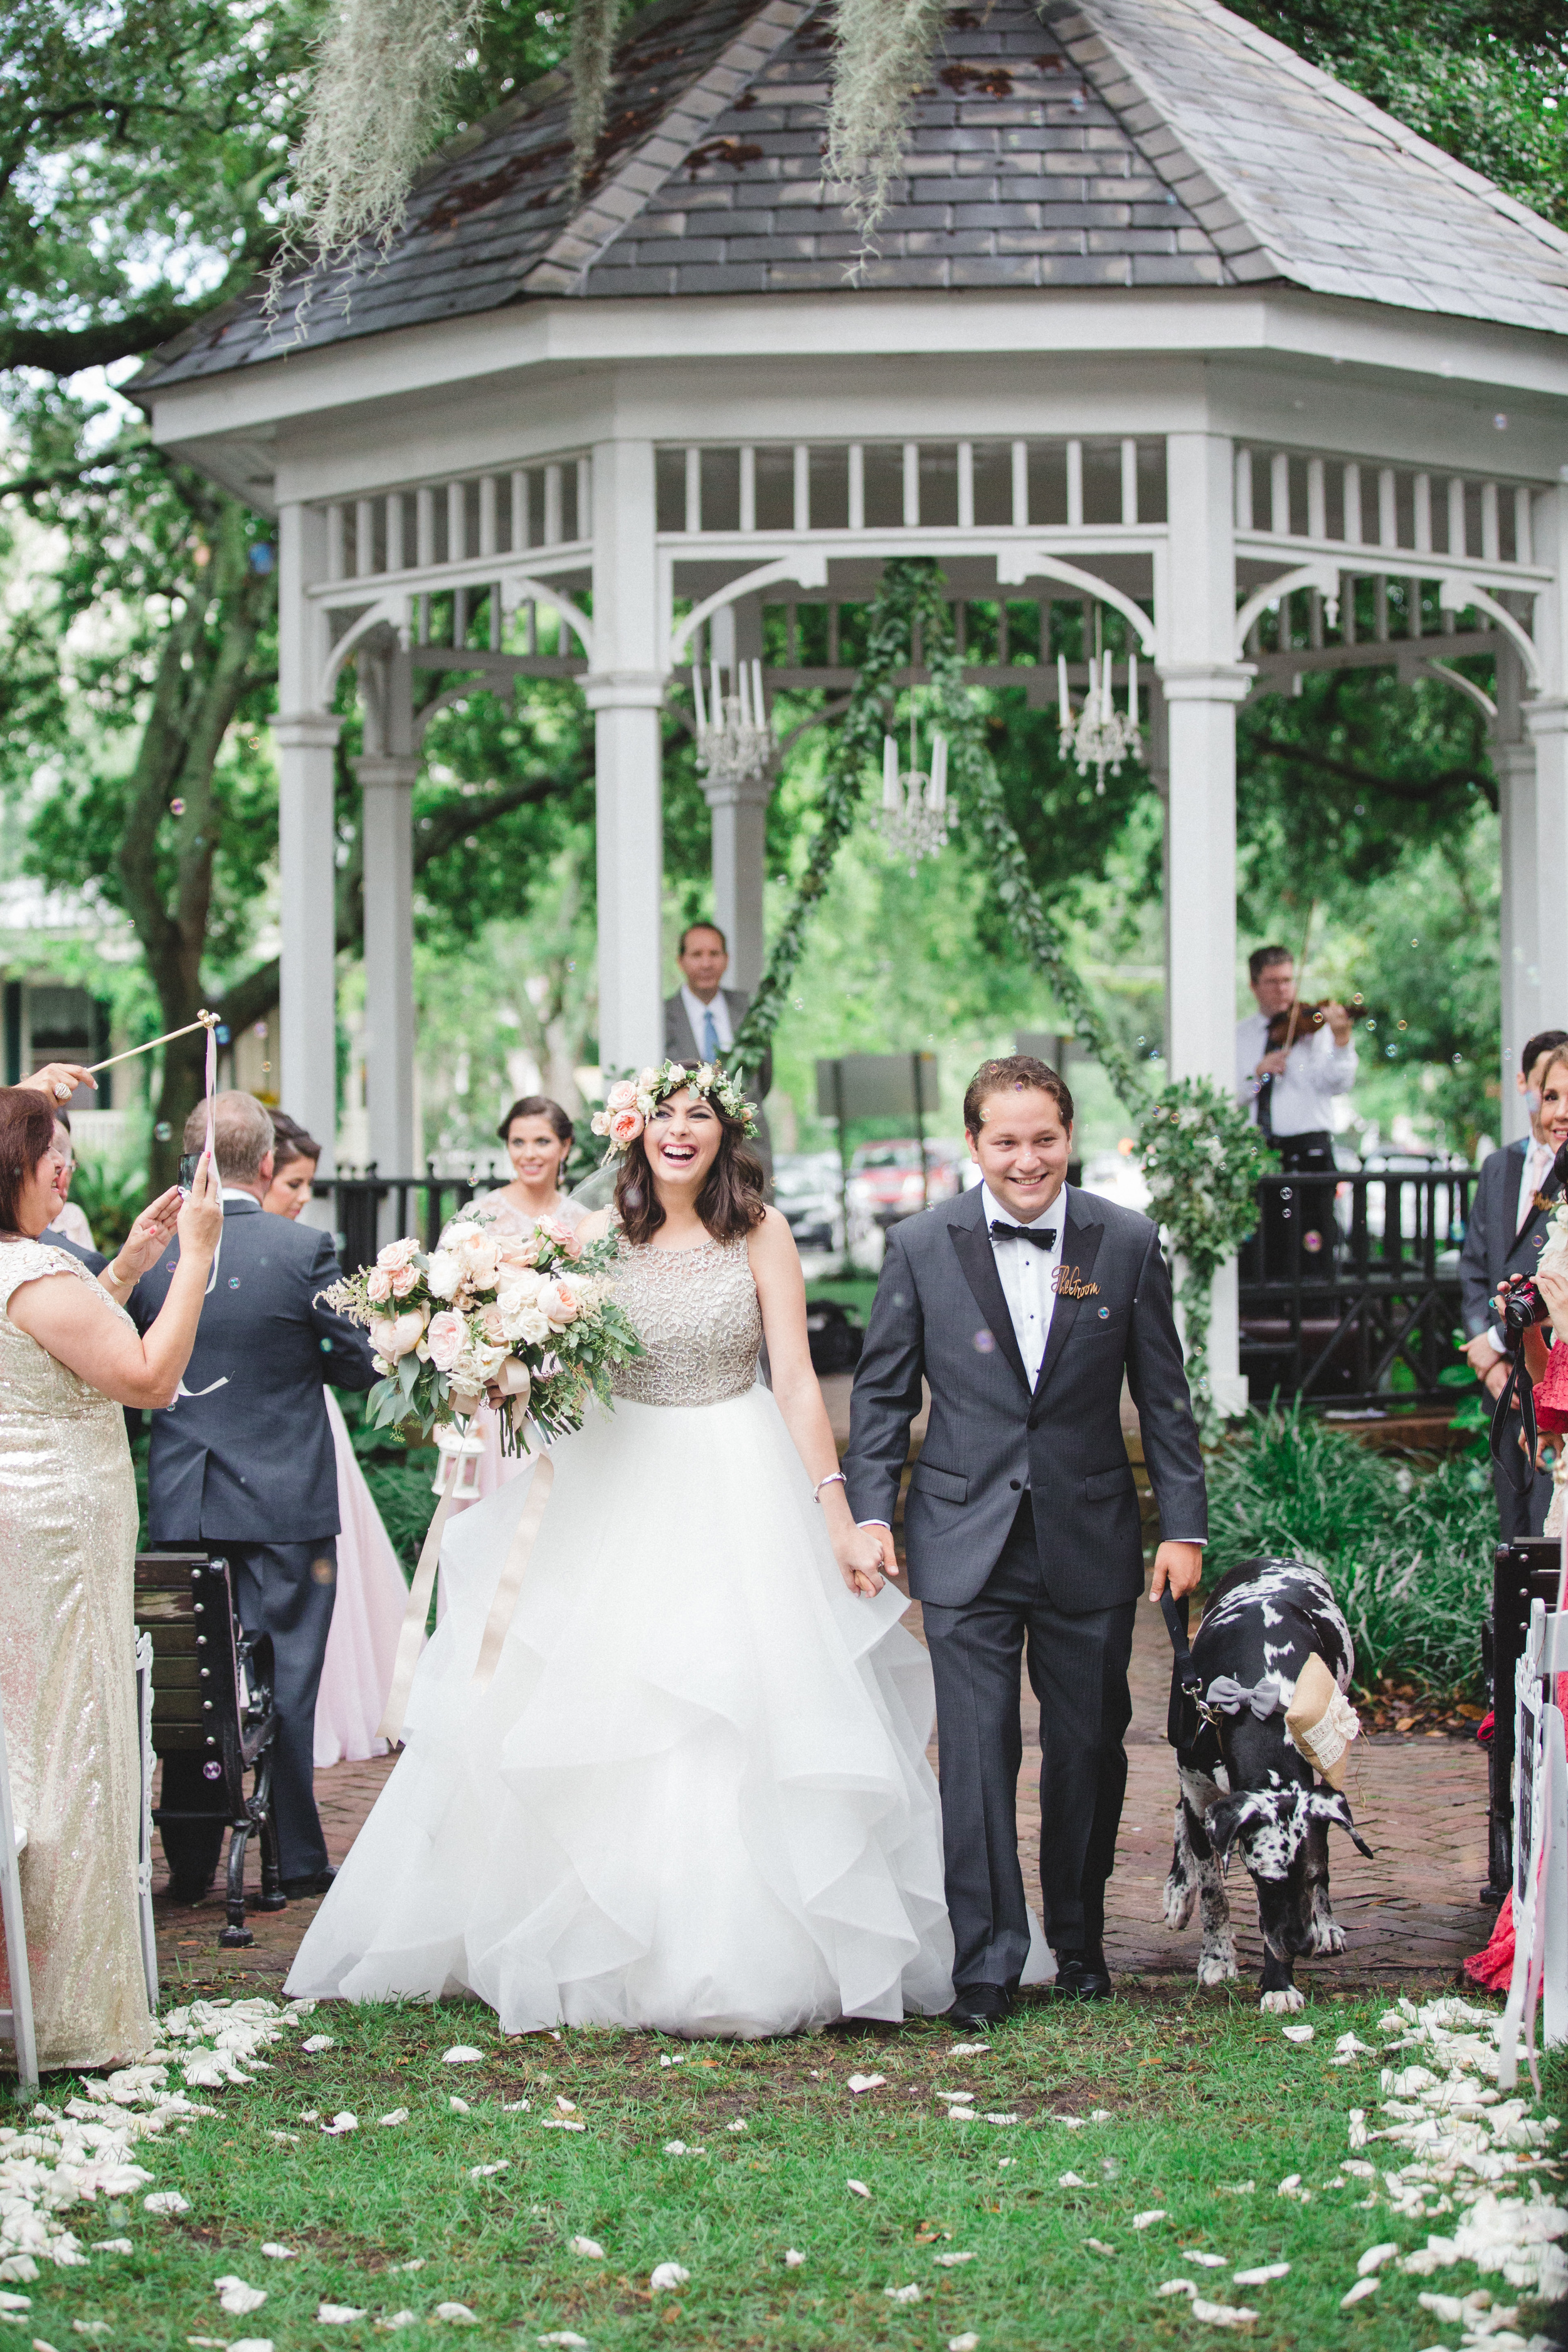 daniela-and-pedro-wedding-izzy-hudgins-photography-a-to-zinnias-whitfield-square-charles-h-morris-center-wedding-ivoyy-and-beau-bridal-boutique-dorie-hayley-paige-savannah-wedding-planner-savannah-bridal-boutique-savannah-weddings-29.jpg